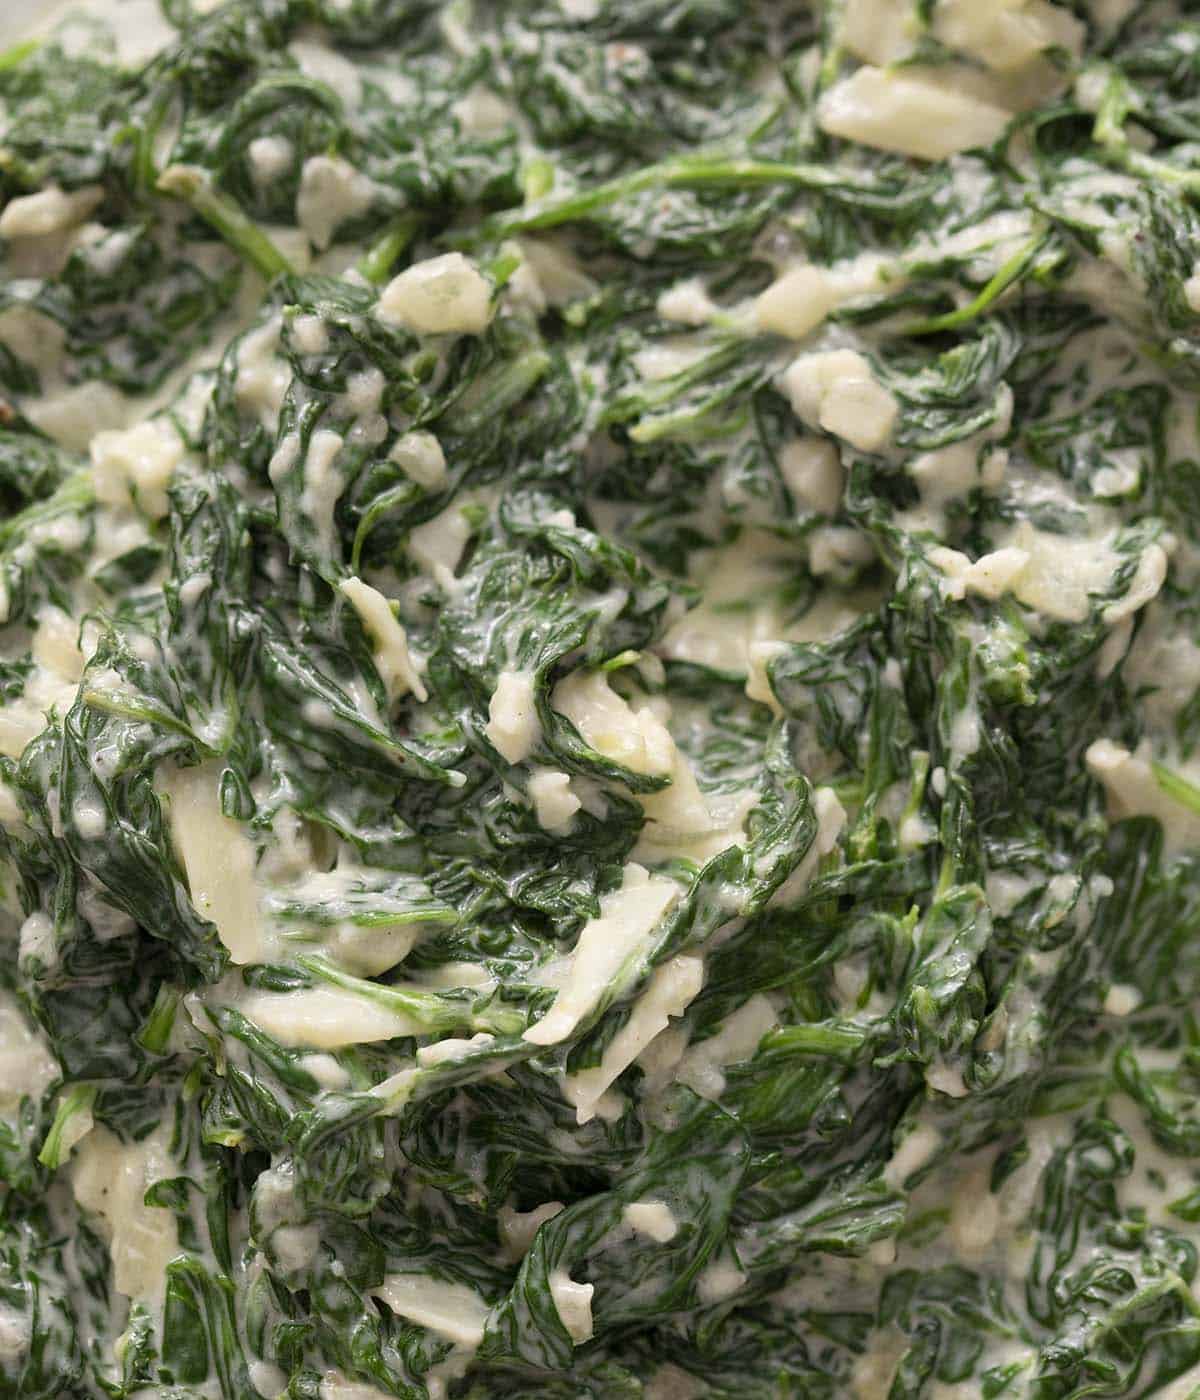 A close up photo of creamed spinach.